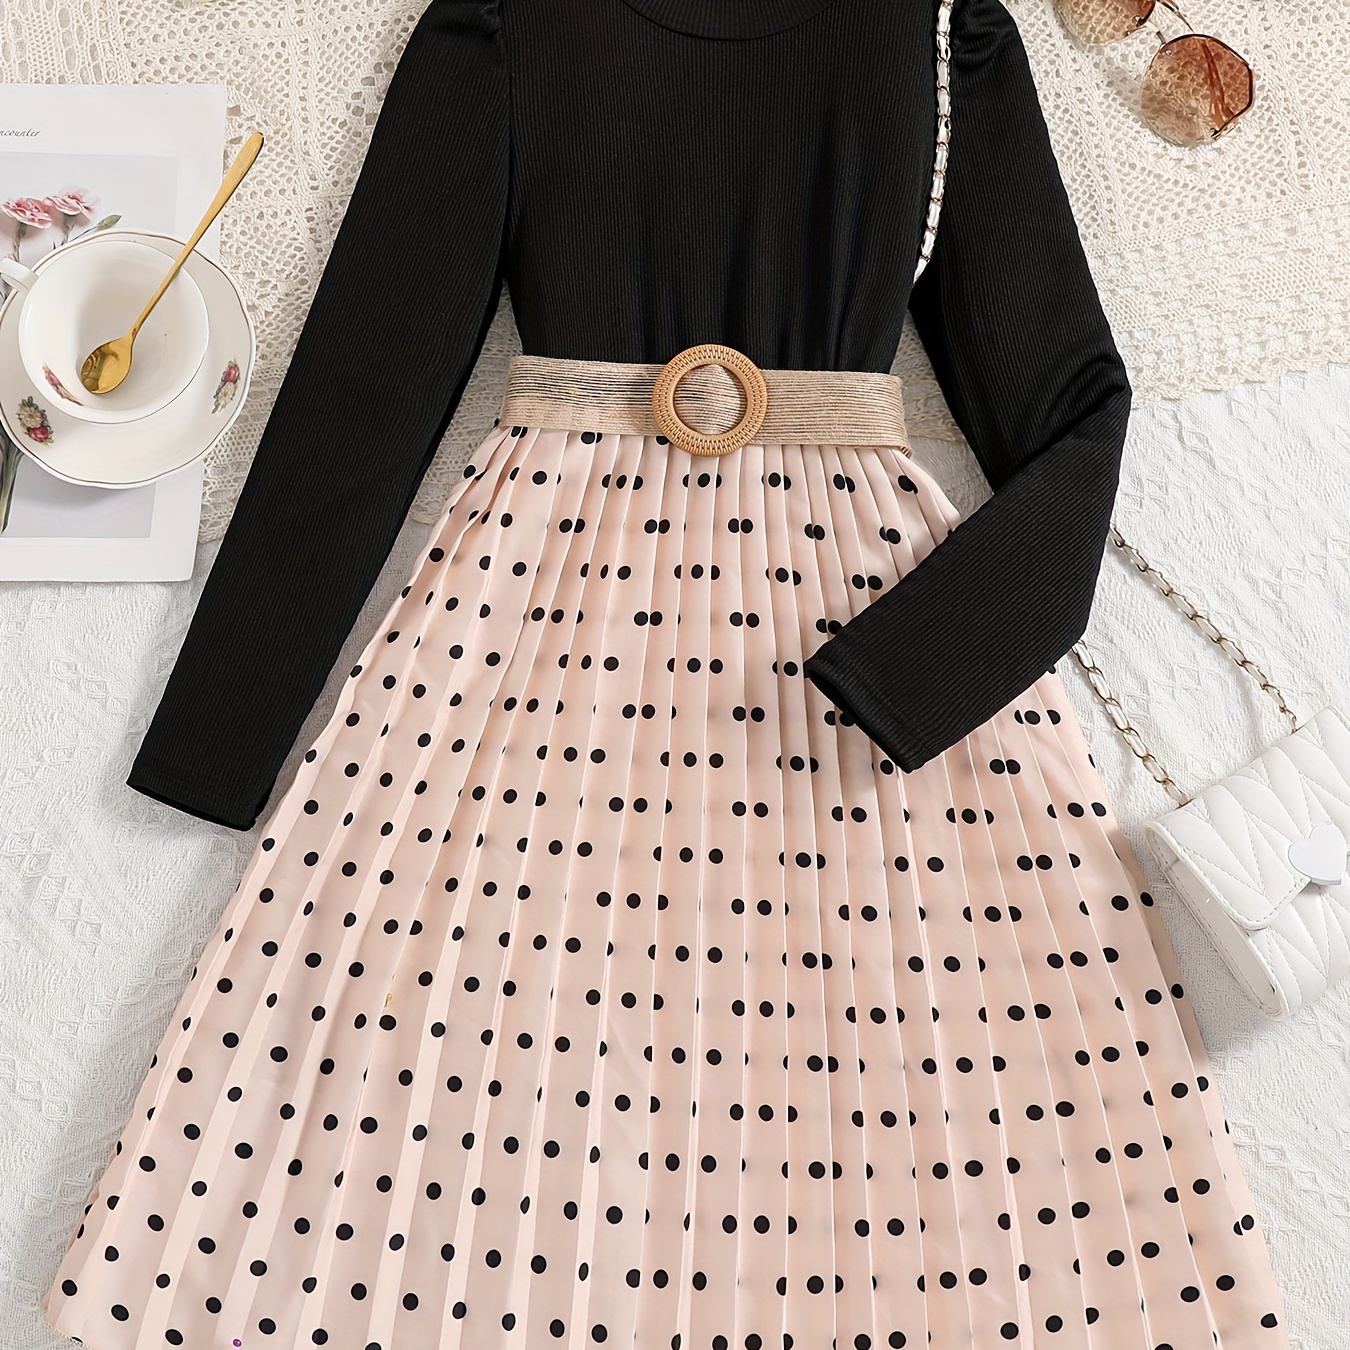 

Girls Casual Splicing Polka Dot Print Long Sleeve Dress With Belt Spring Fall Party Gift (1 Size Up)